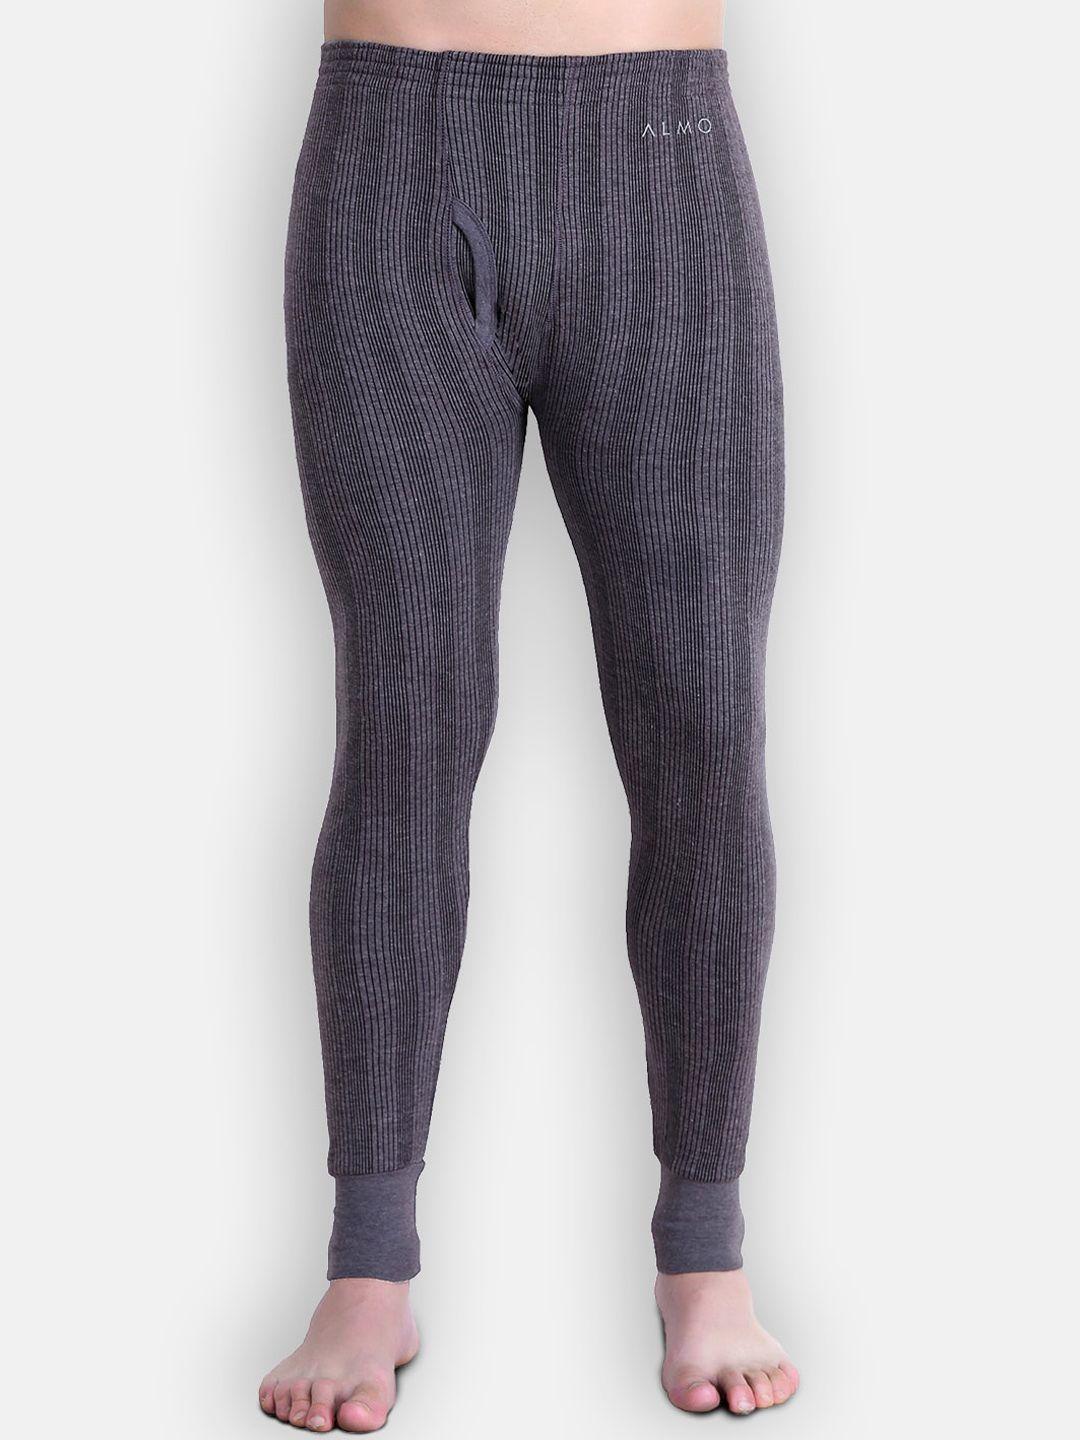 almo wear men grey solid cotton thermal bottoms